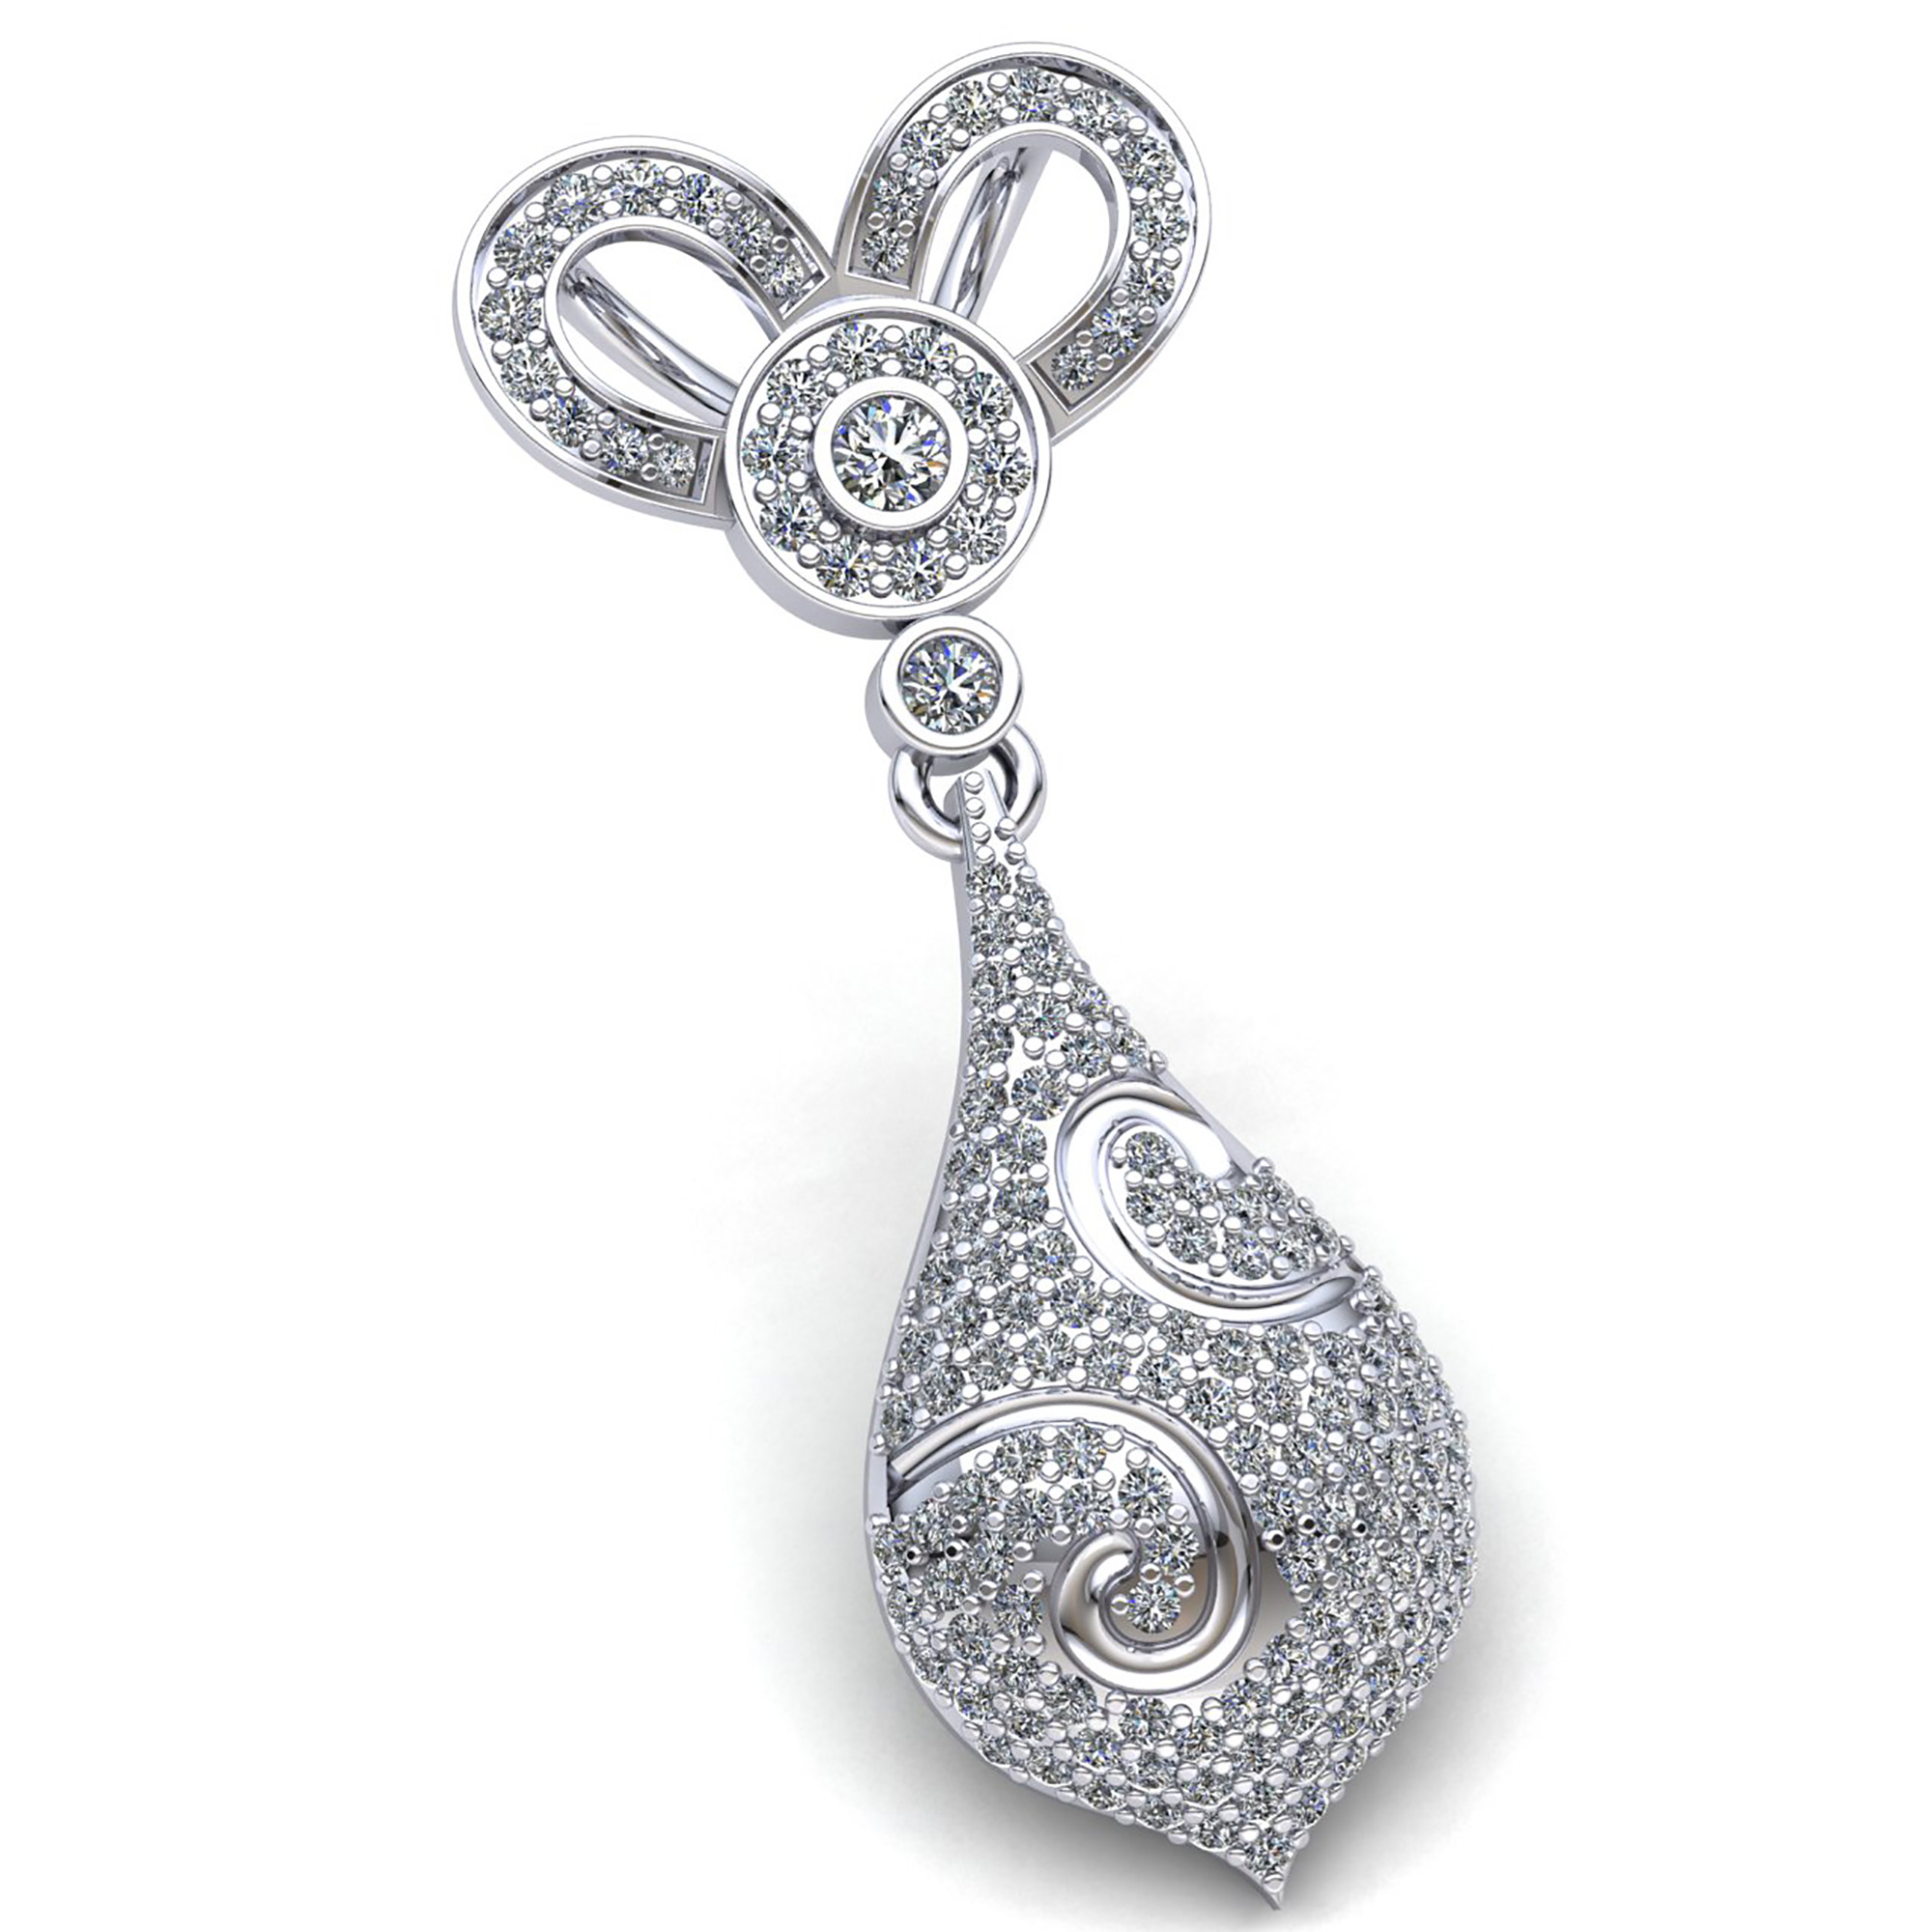 Jewel We Sell Natural 1.5carat Round Cut Diamond Ladies Cluster Dangle Trellis Pendant Solid 14K White Gold GH SI1